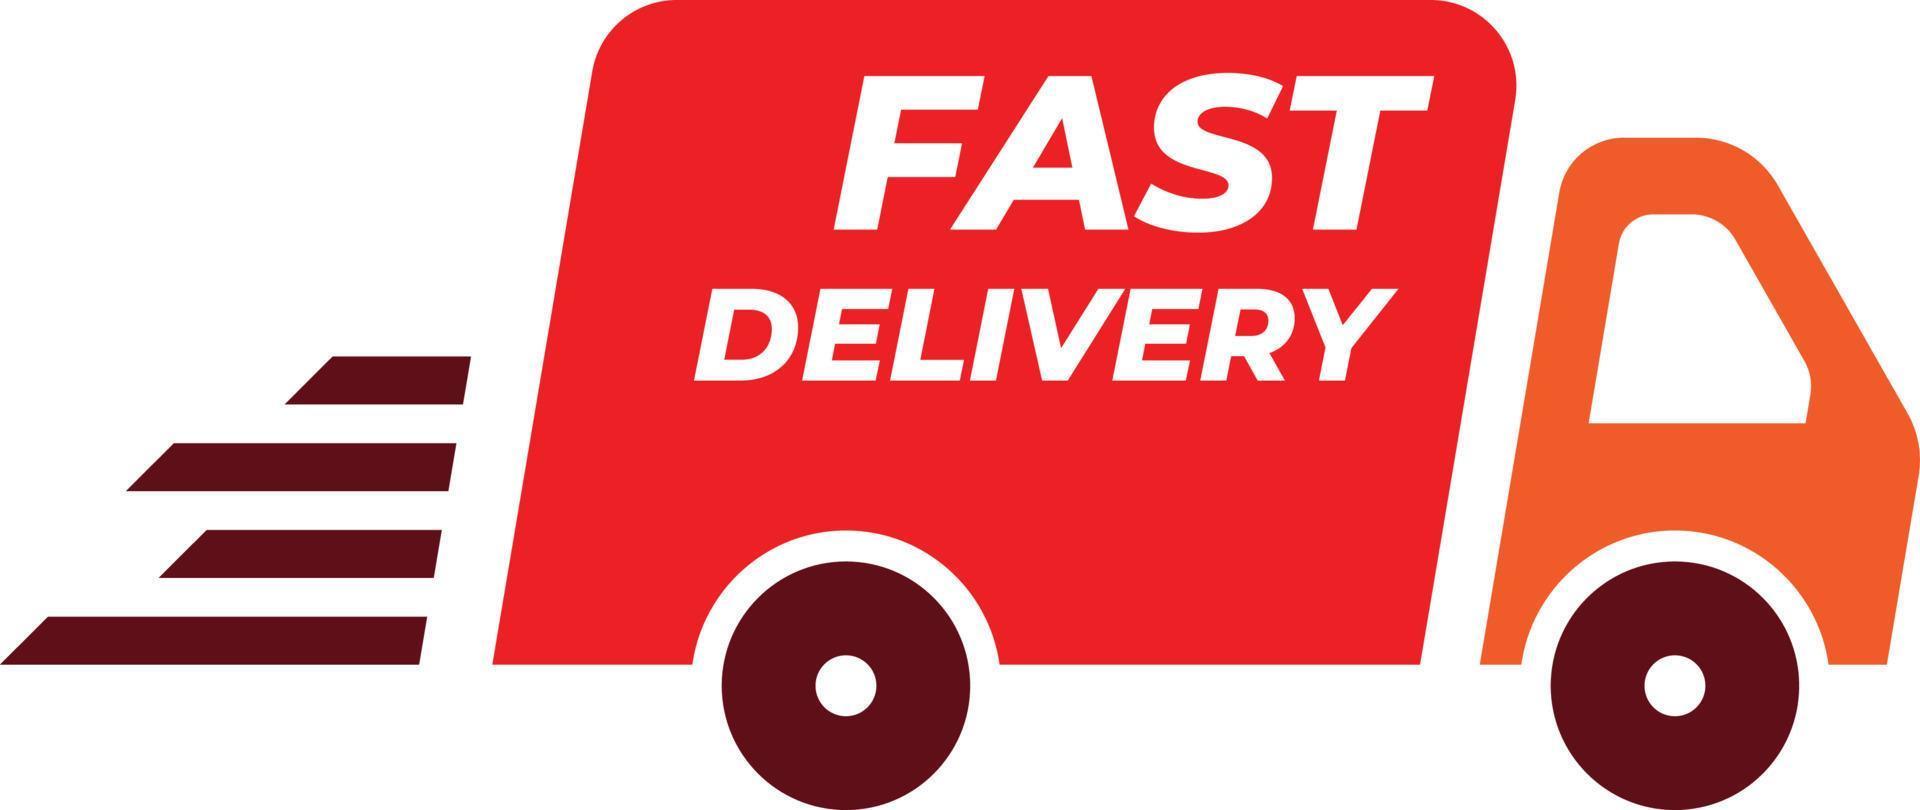 Fast delivery icon vector